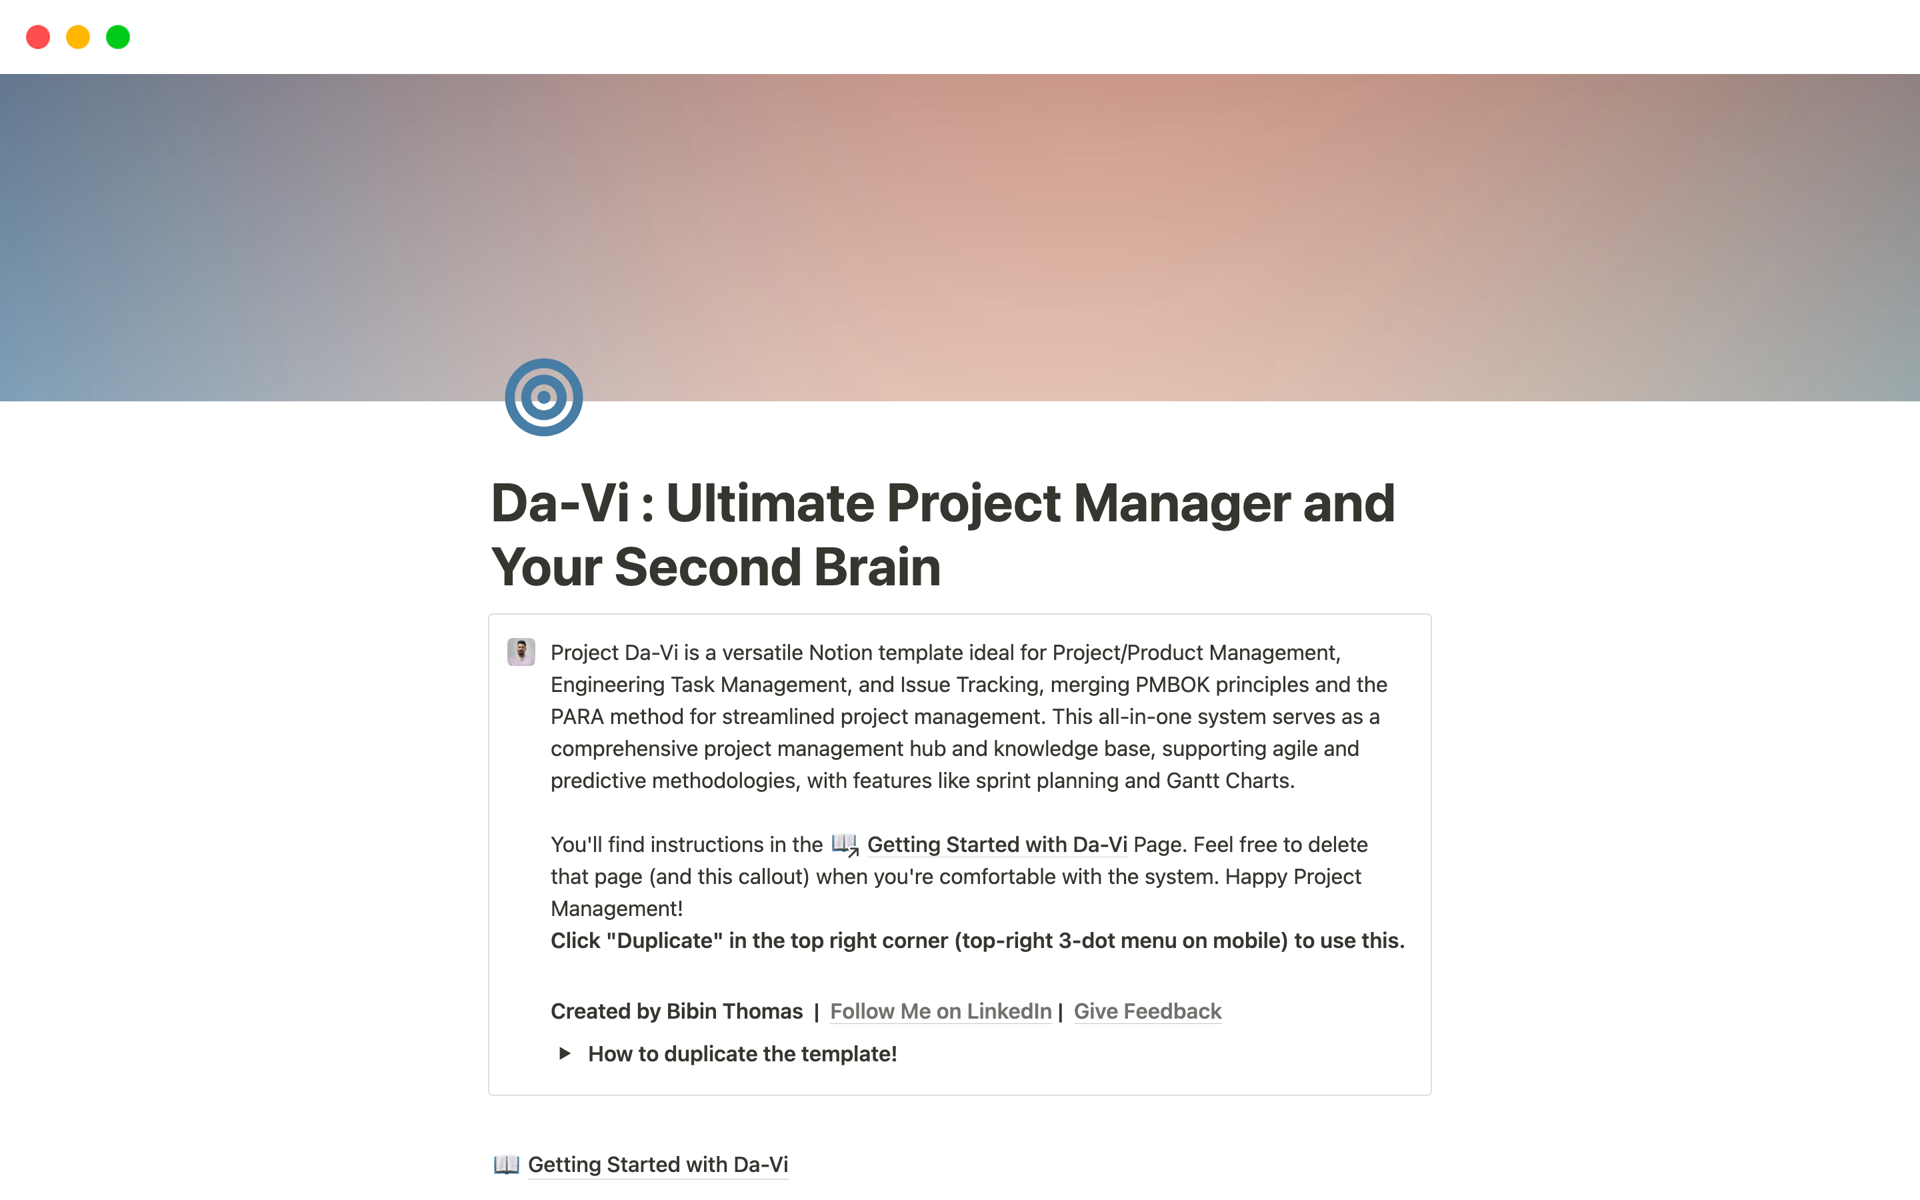 Project "Da-Vi", inspired by da Vinci's genius, innovatively blends PMBOK's principles and Tiago Forte's 'Building a Second Brain' concepts for dynamic project management. The template was crafted initially to replace advanced tools like Linear and Jira.